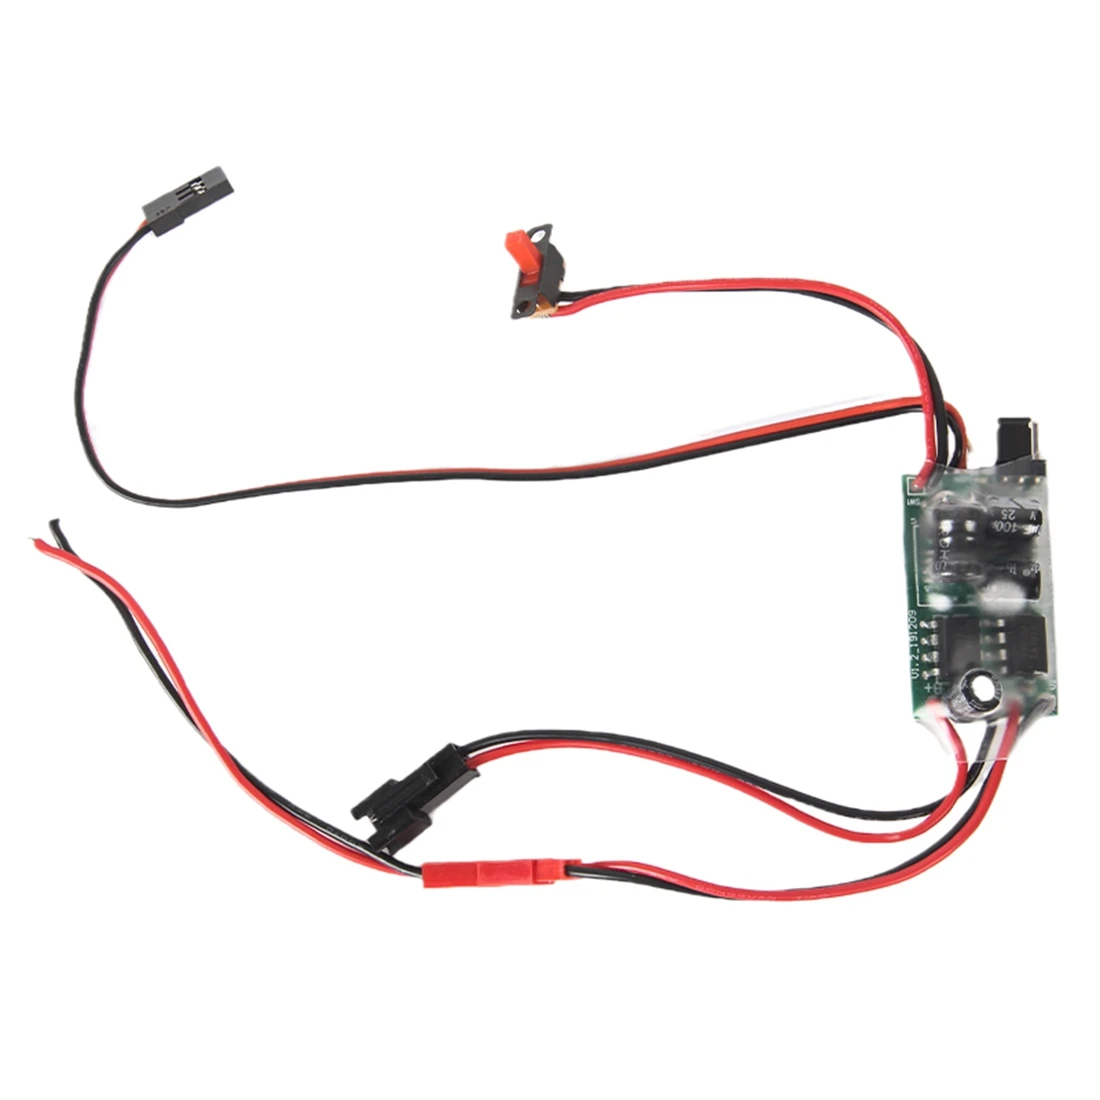 

16A Brushed ESC Speed Controller for WPL C14 C24 C34 C44 B14 B24 B16 B36 1/16 RC Car Upgrades Parts Accessories